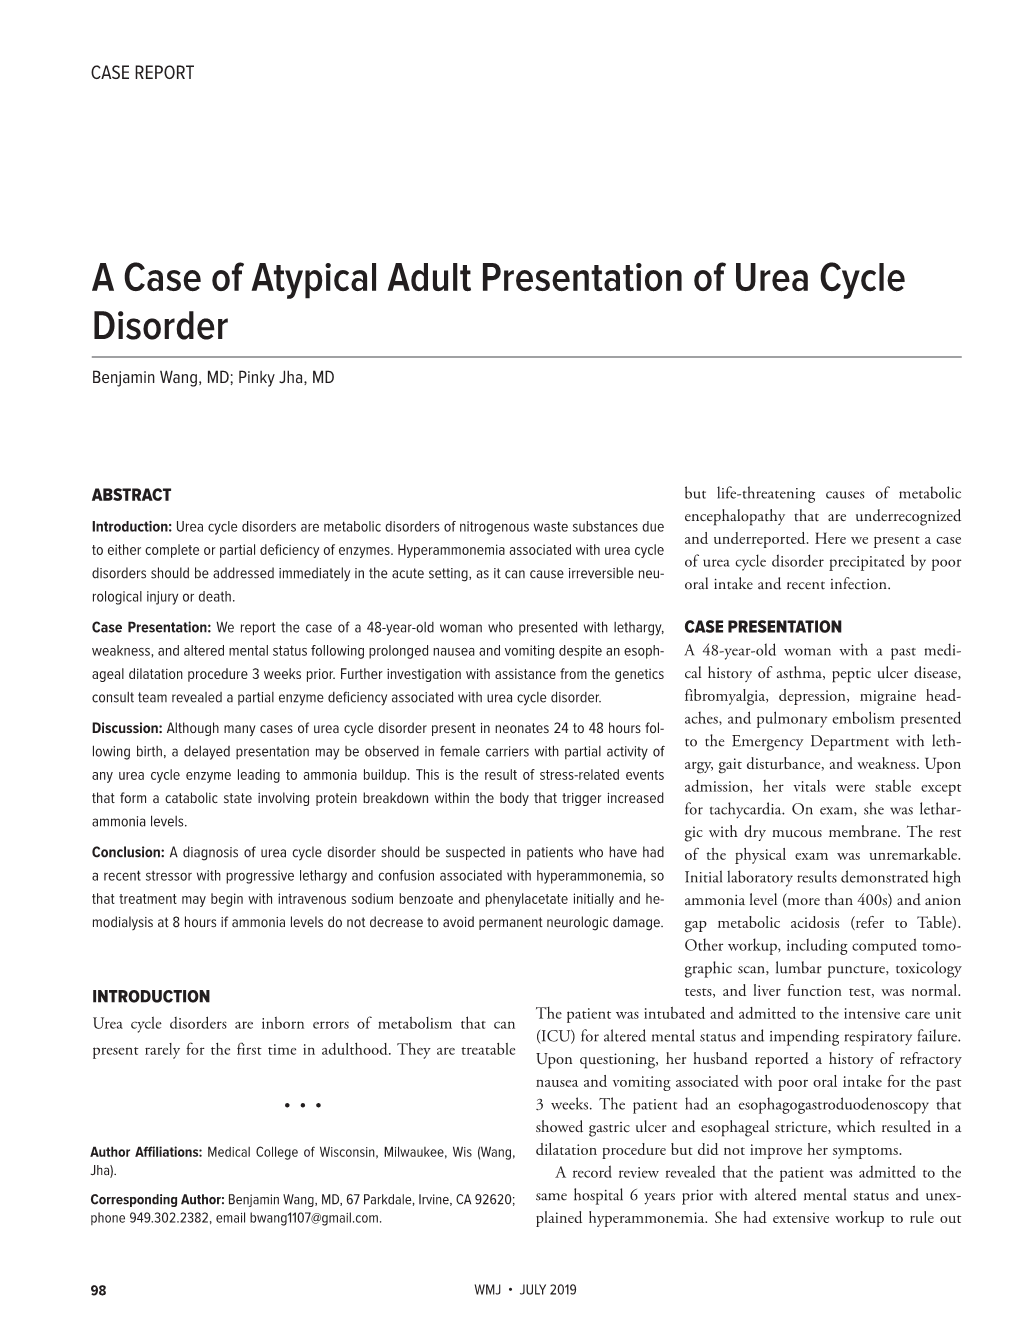 A Case of Atypical Adult Presentation of Urea Cycle Disorder